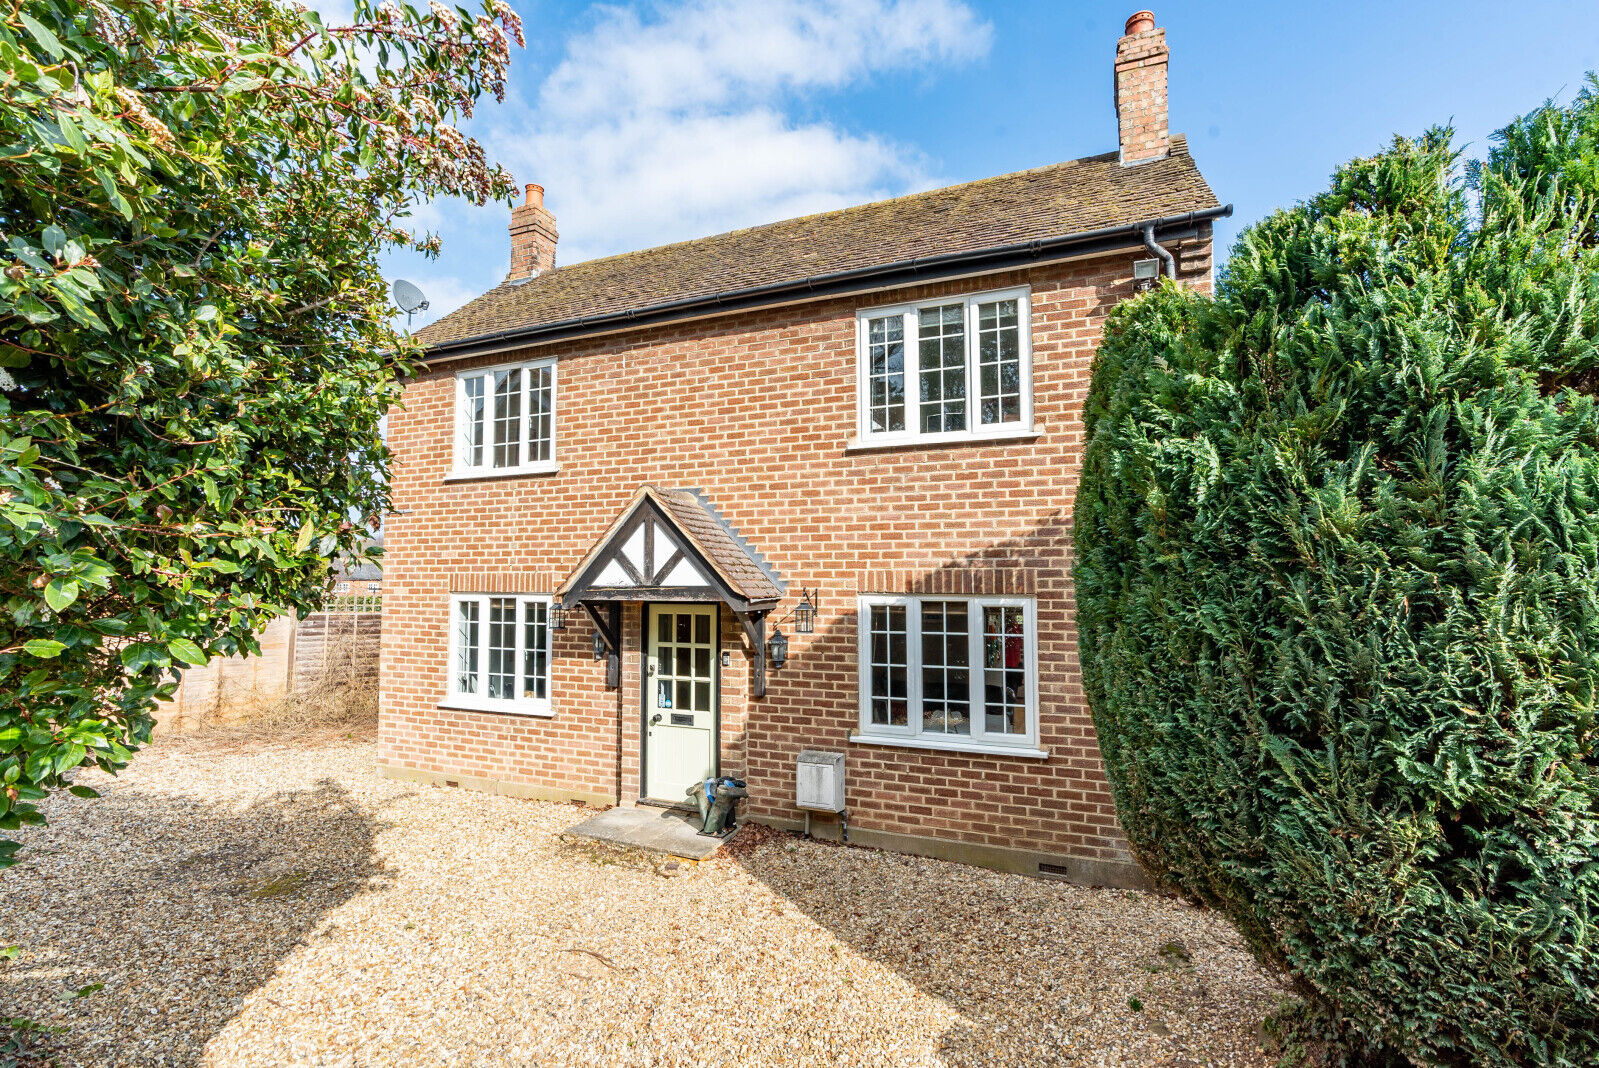 3 bedroom detached house for sale Lower Gustard Wood, Wheathampstead, AL4, main image